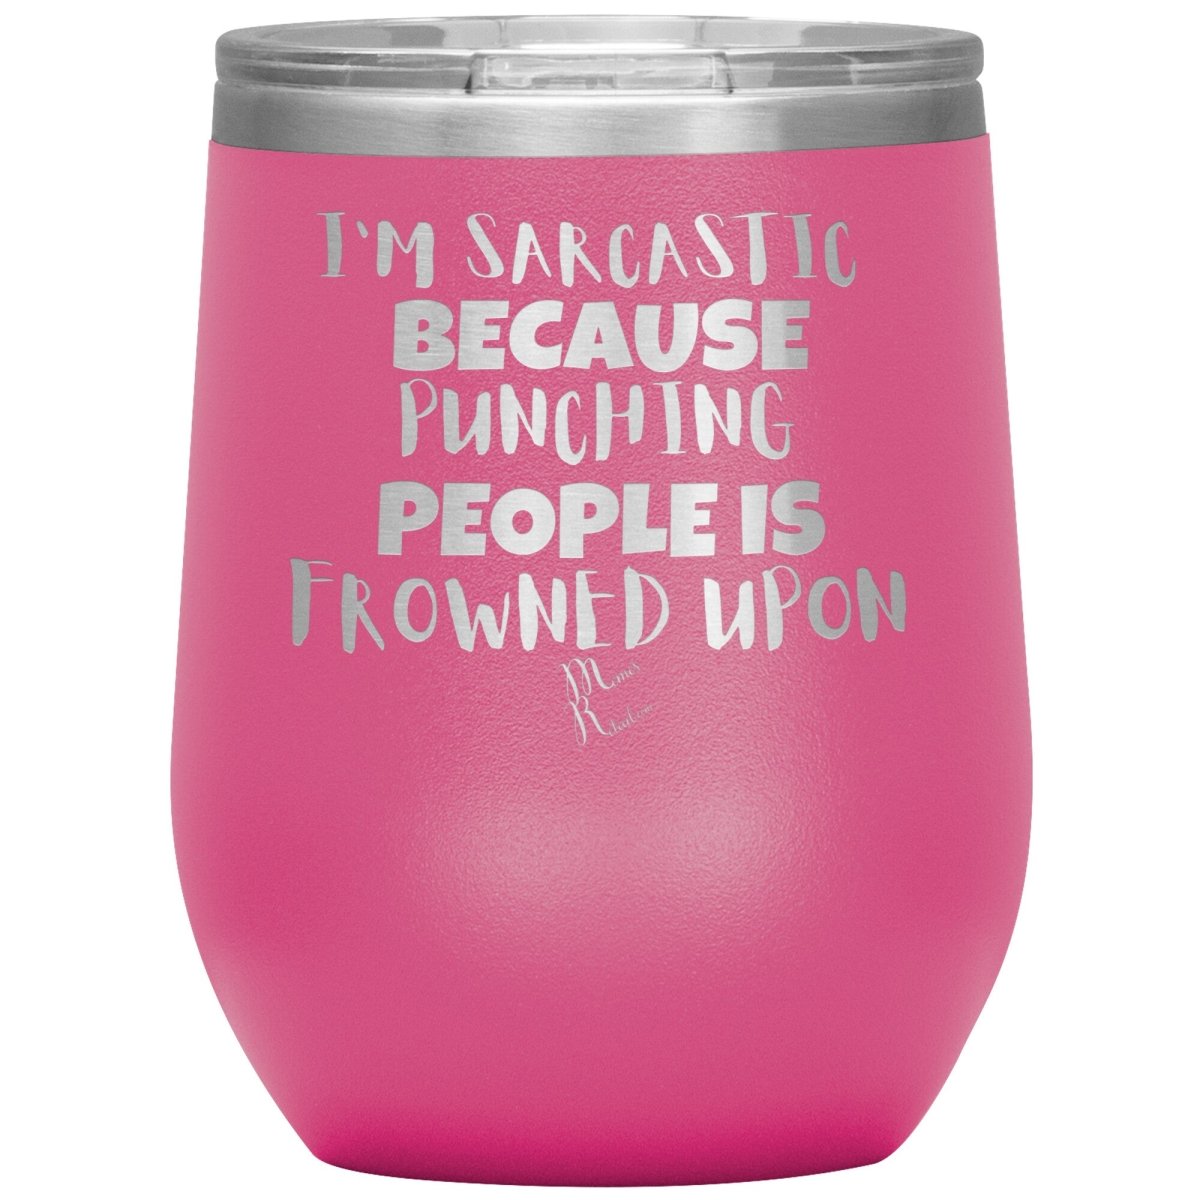 I'm Sarcastic Because Punching People is Frowned Upon Tumblers, 12oz Wine Insulated Tumbler / Pink - MemesRetail.com